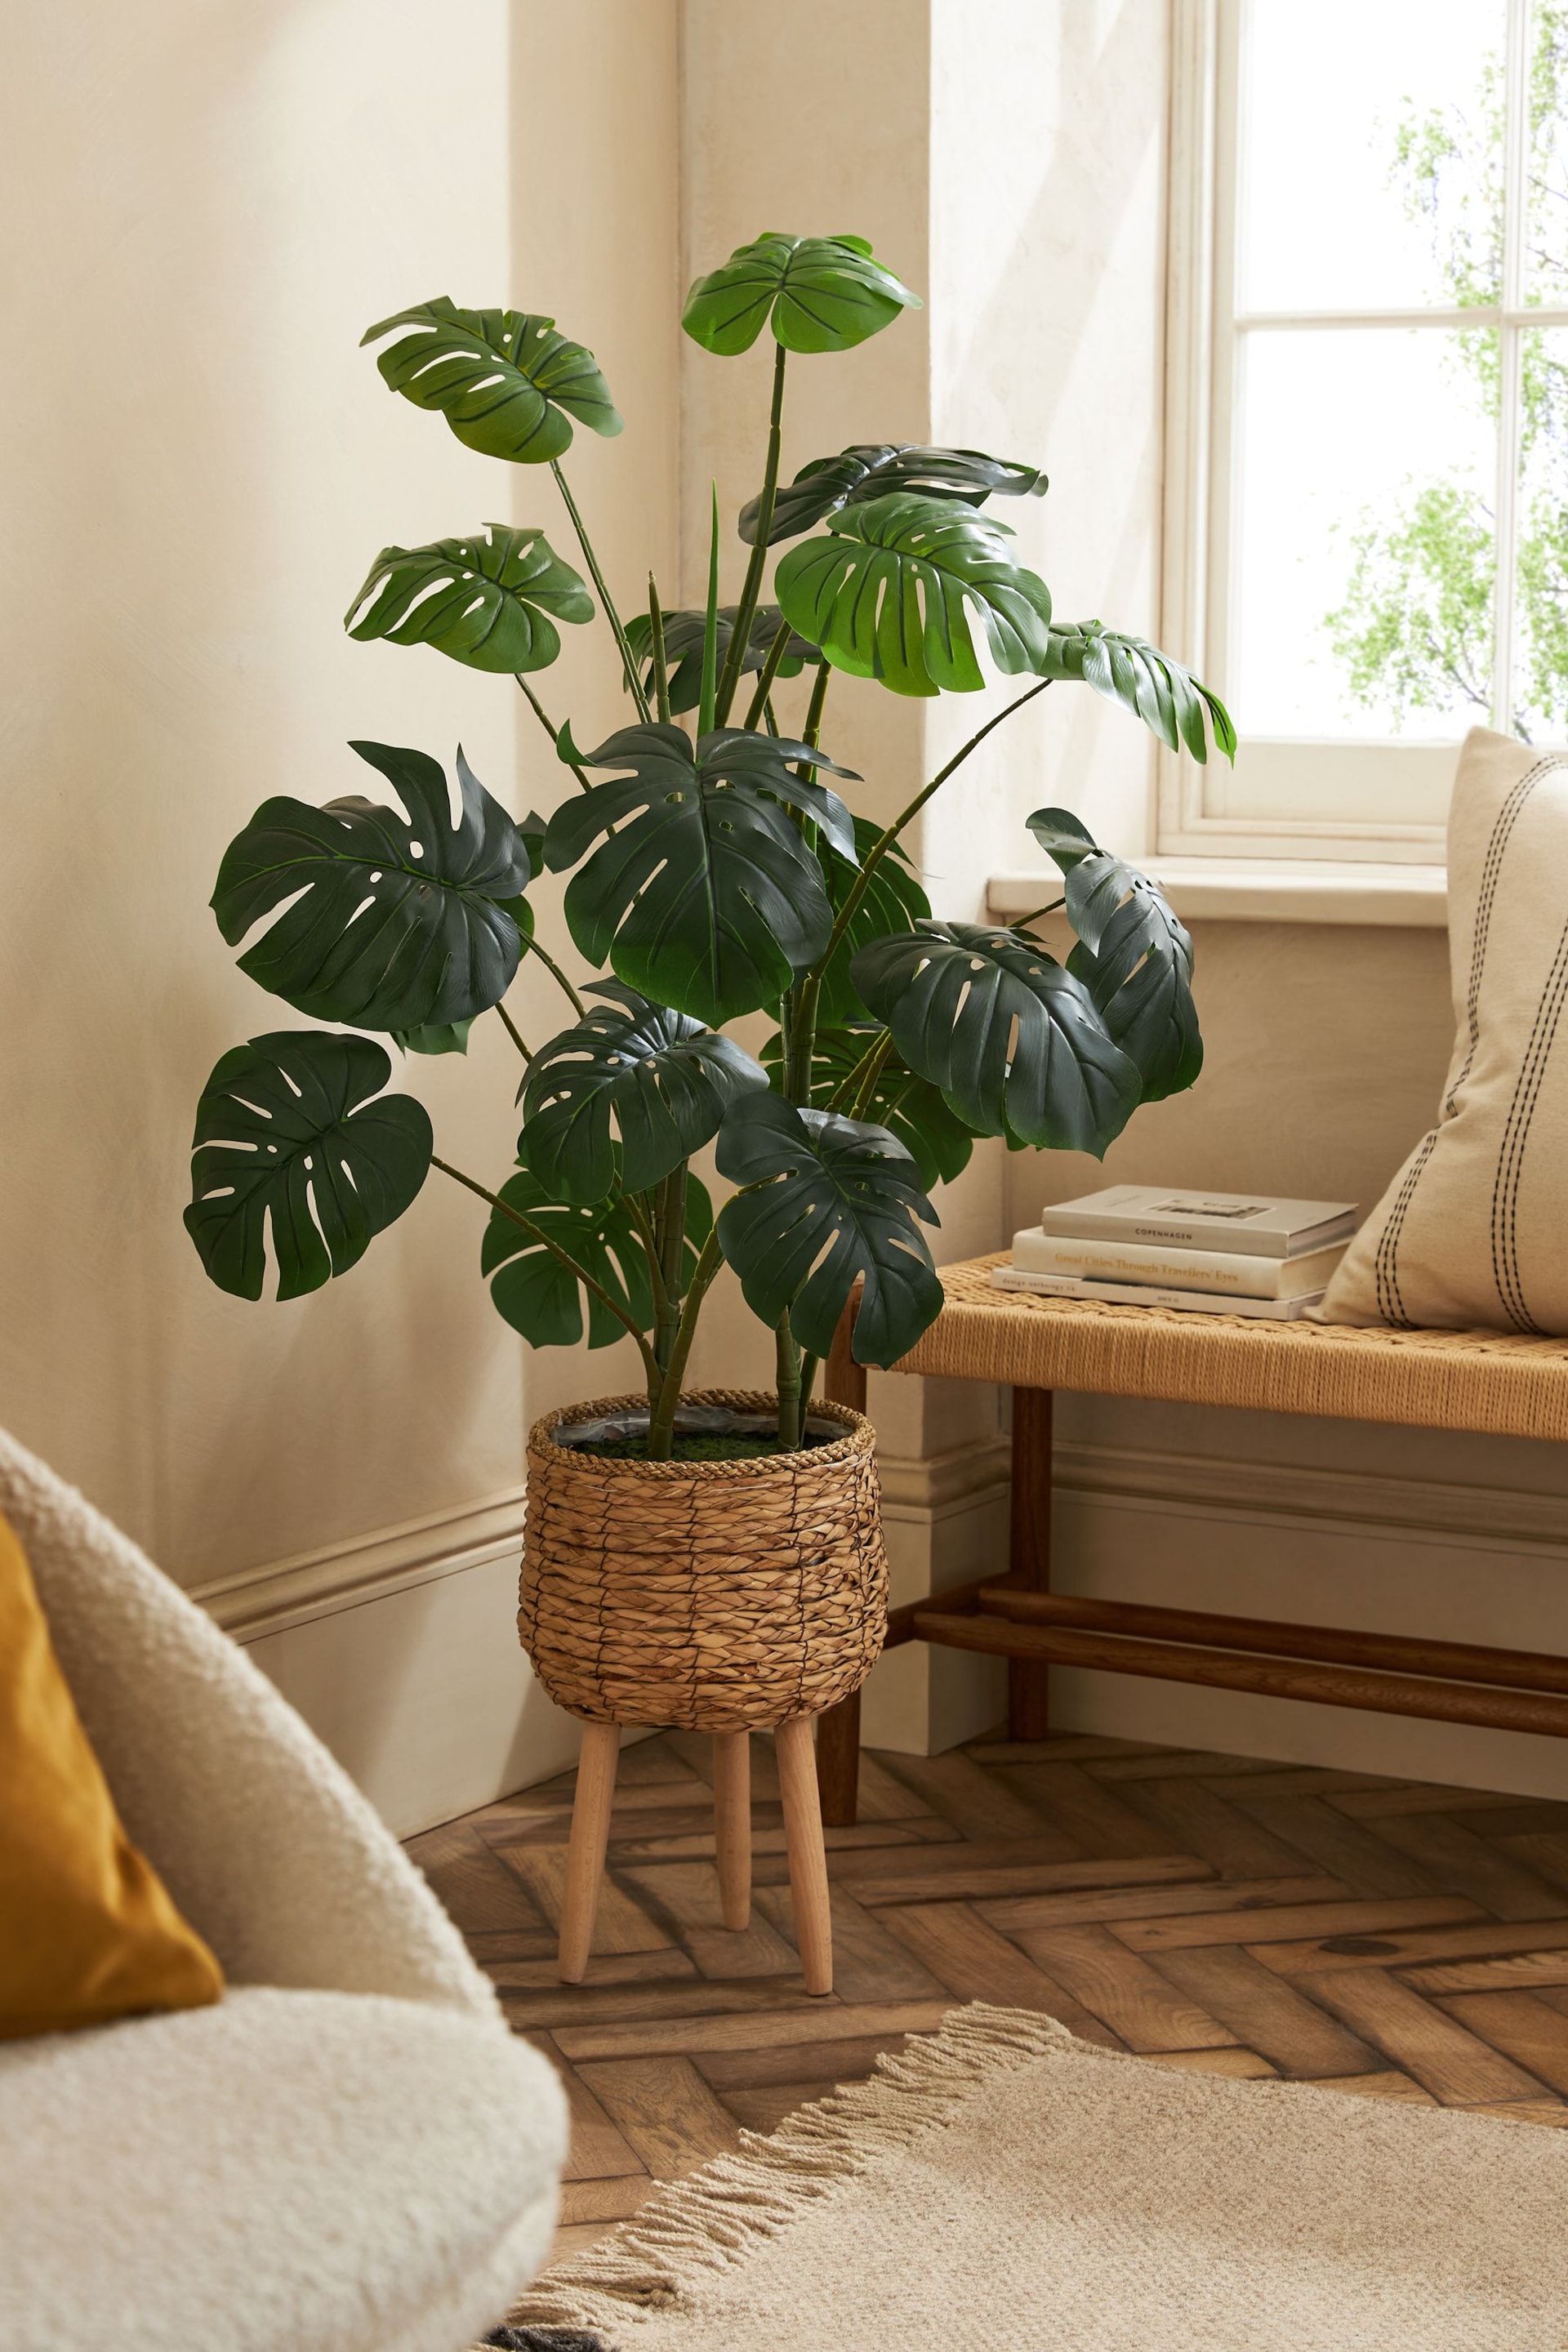 Green Artificial Cheese Plant in Rattan Planter With Legs - Image 1 of 4